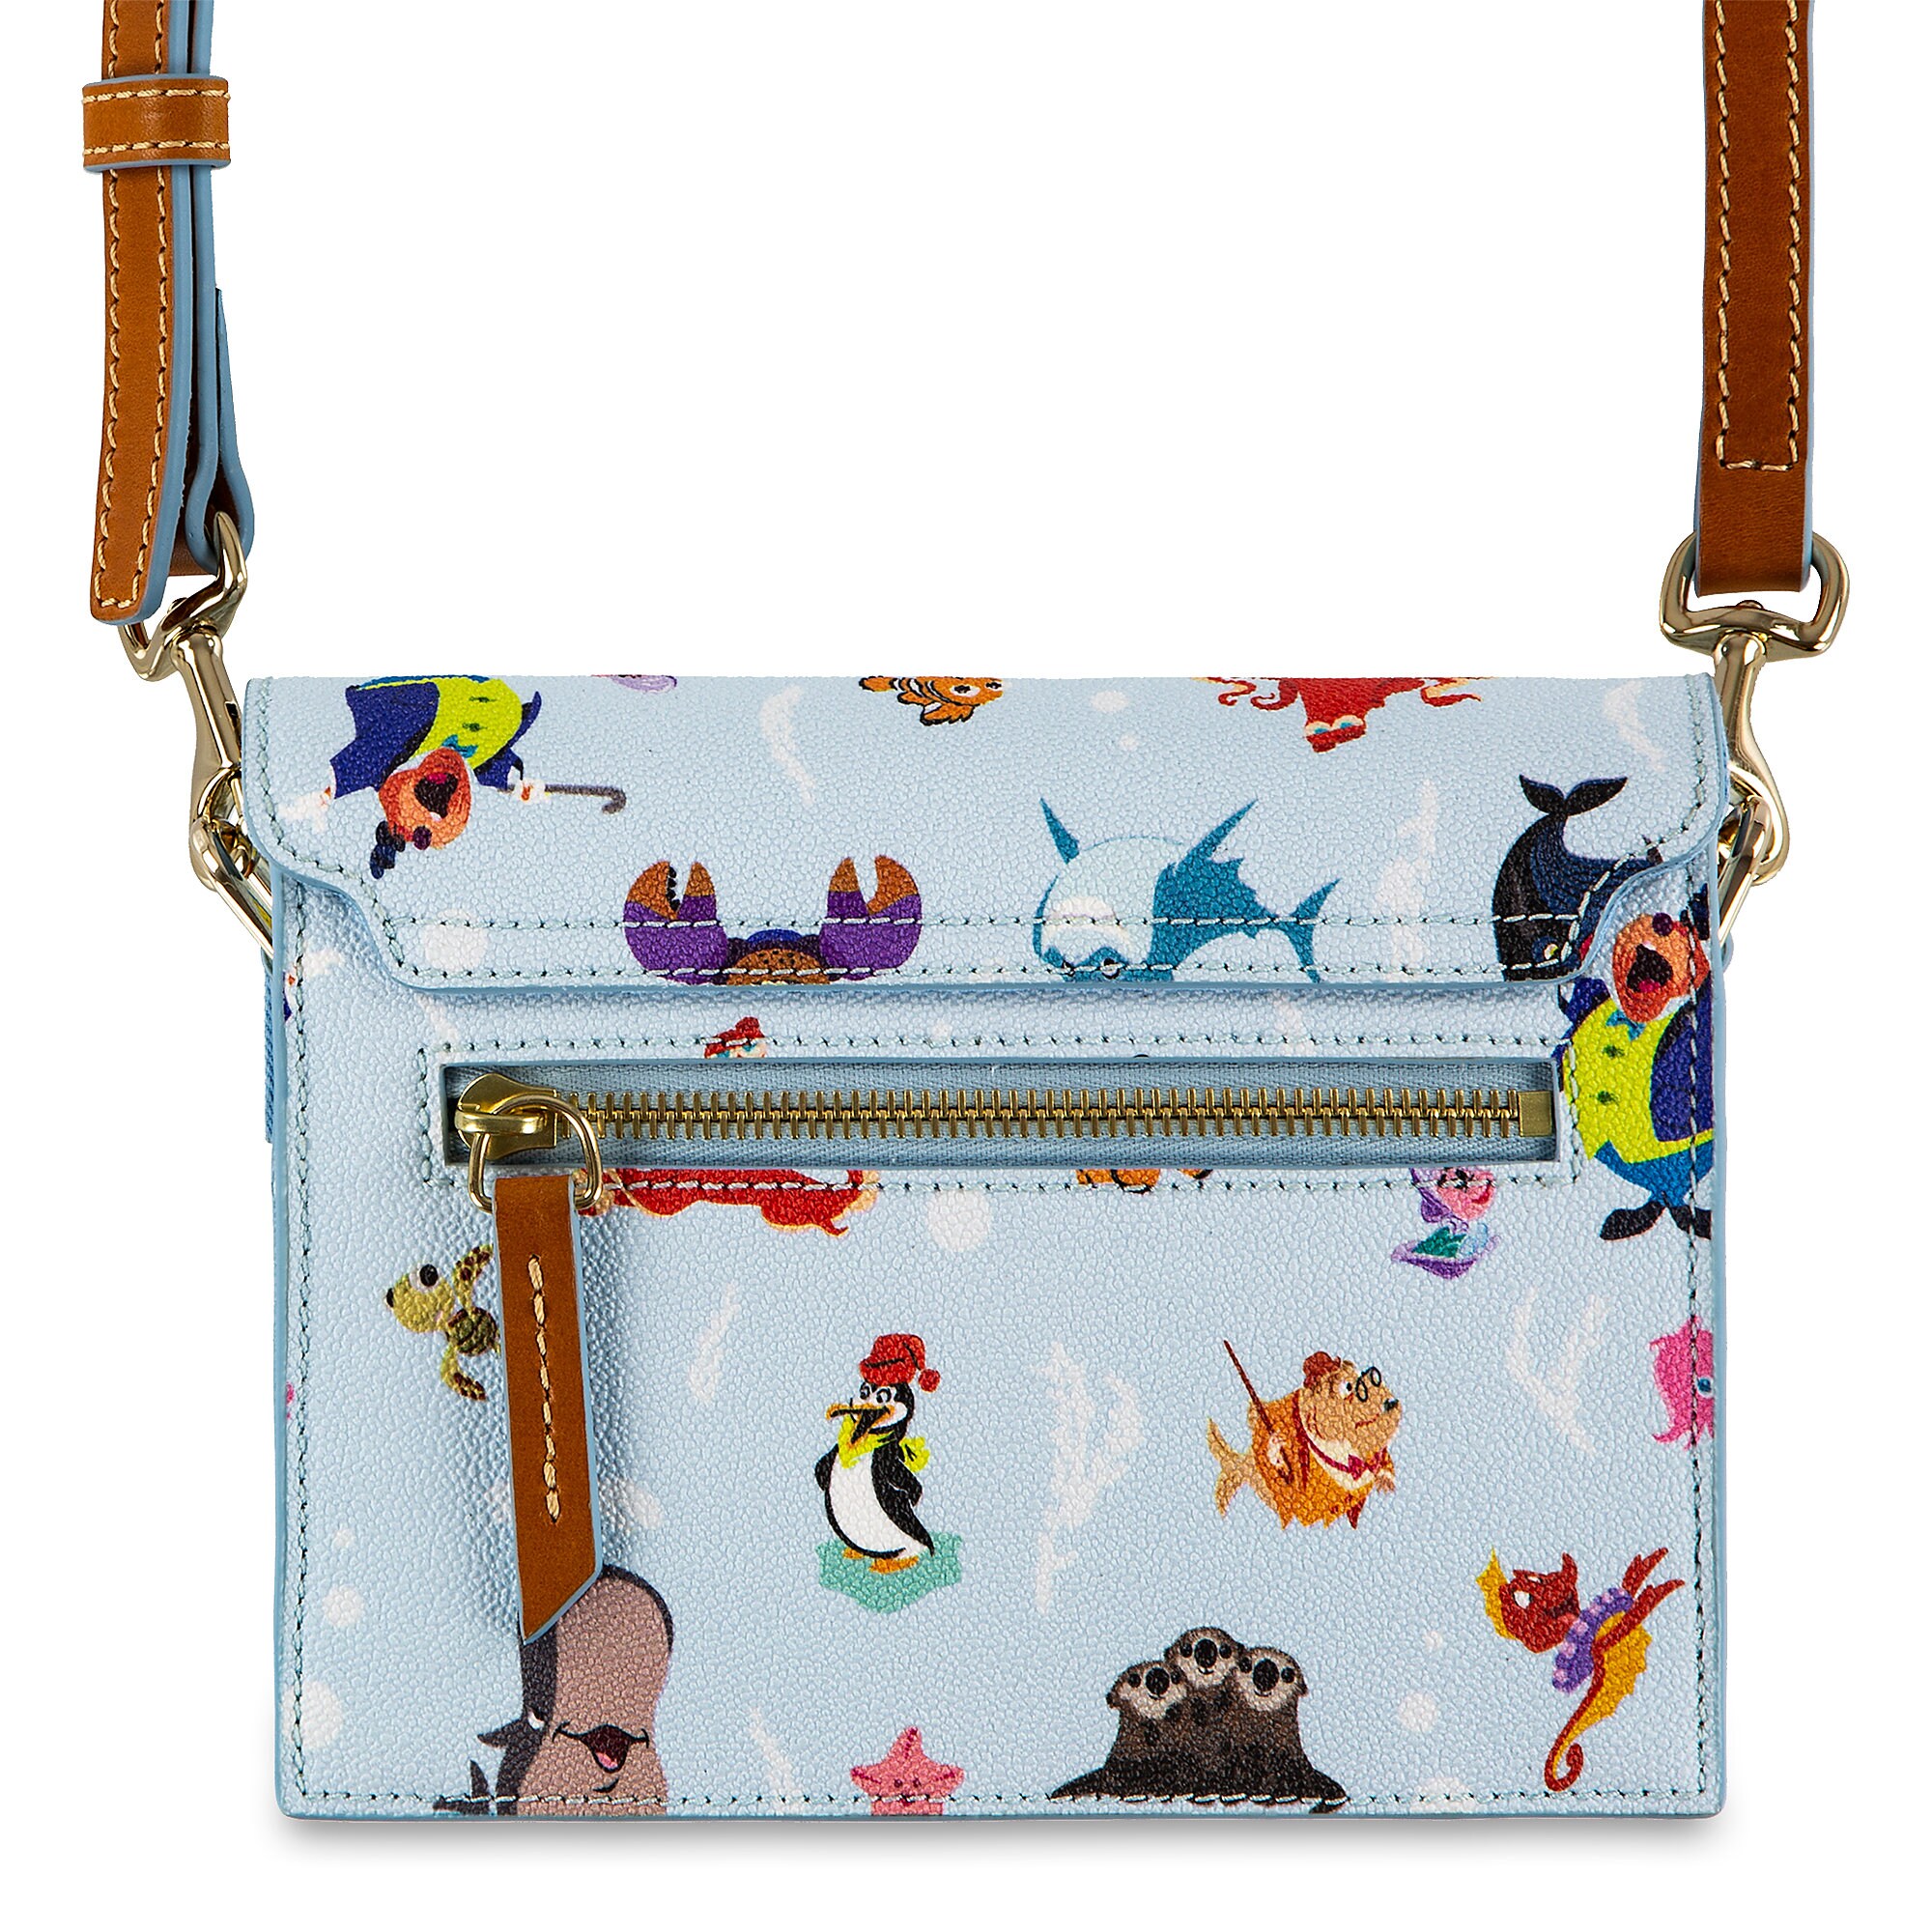 Out to Sea Crossbody Bag by Dooney & Bourke